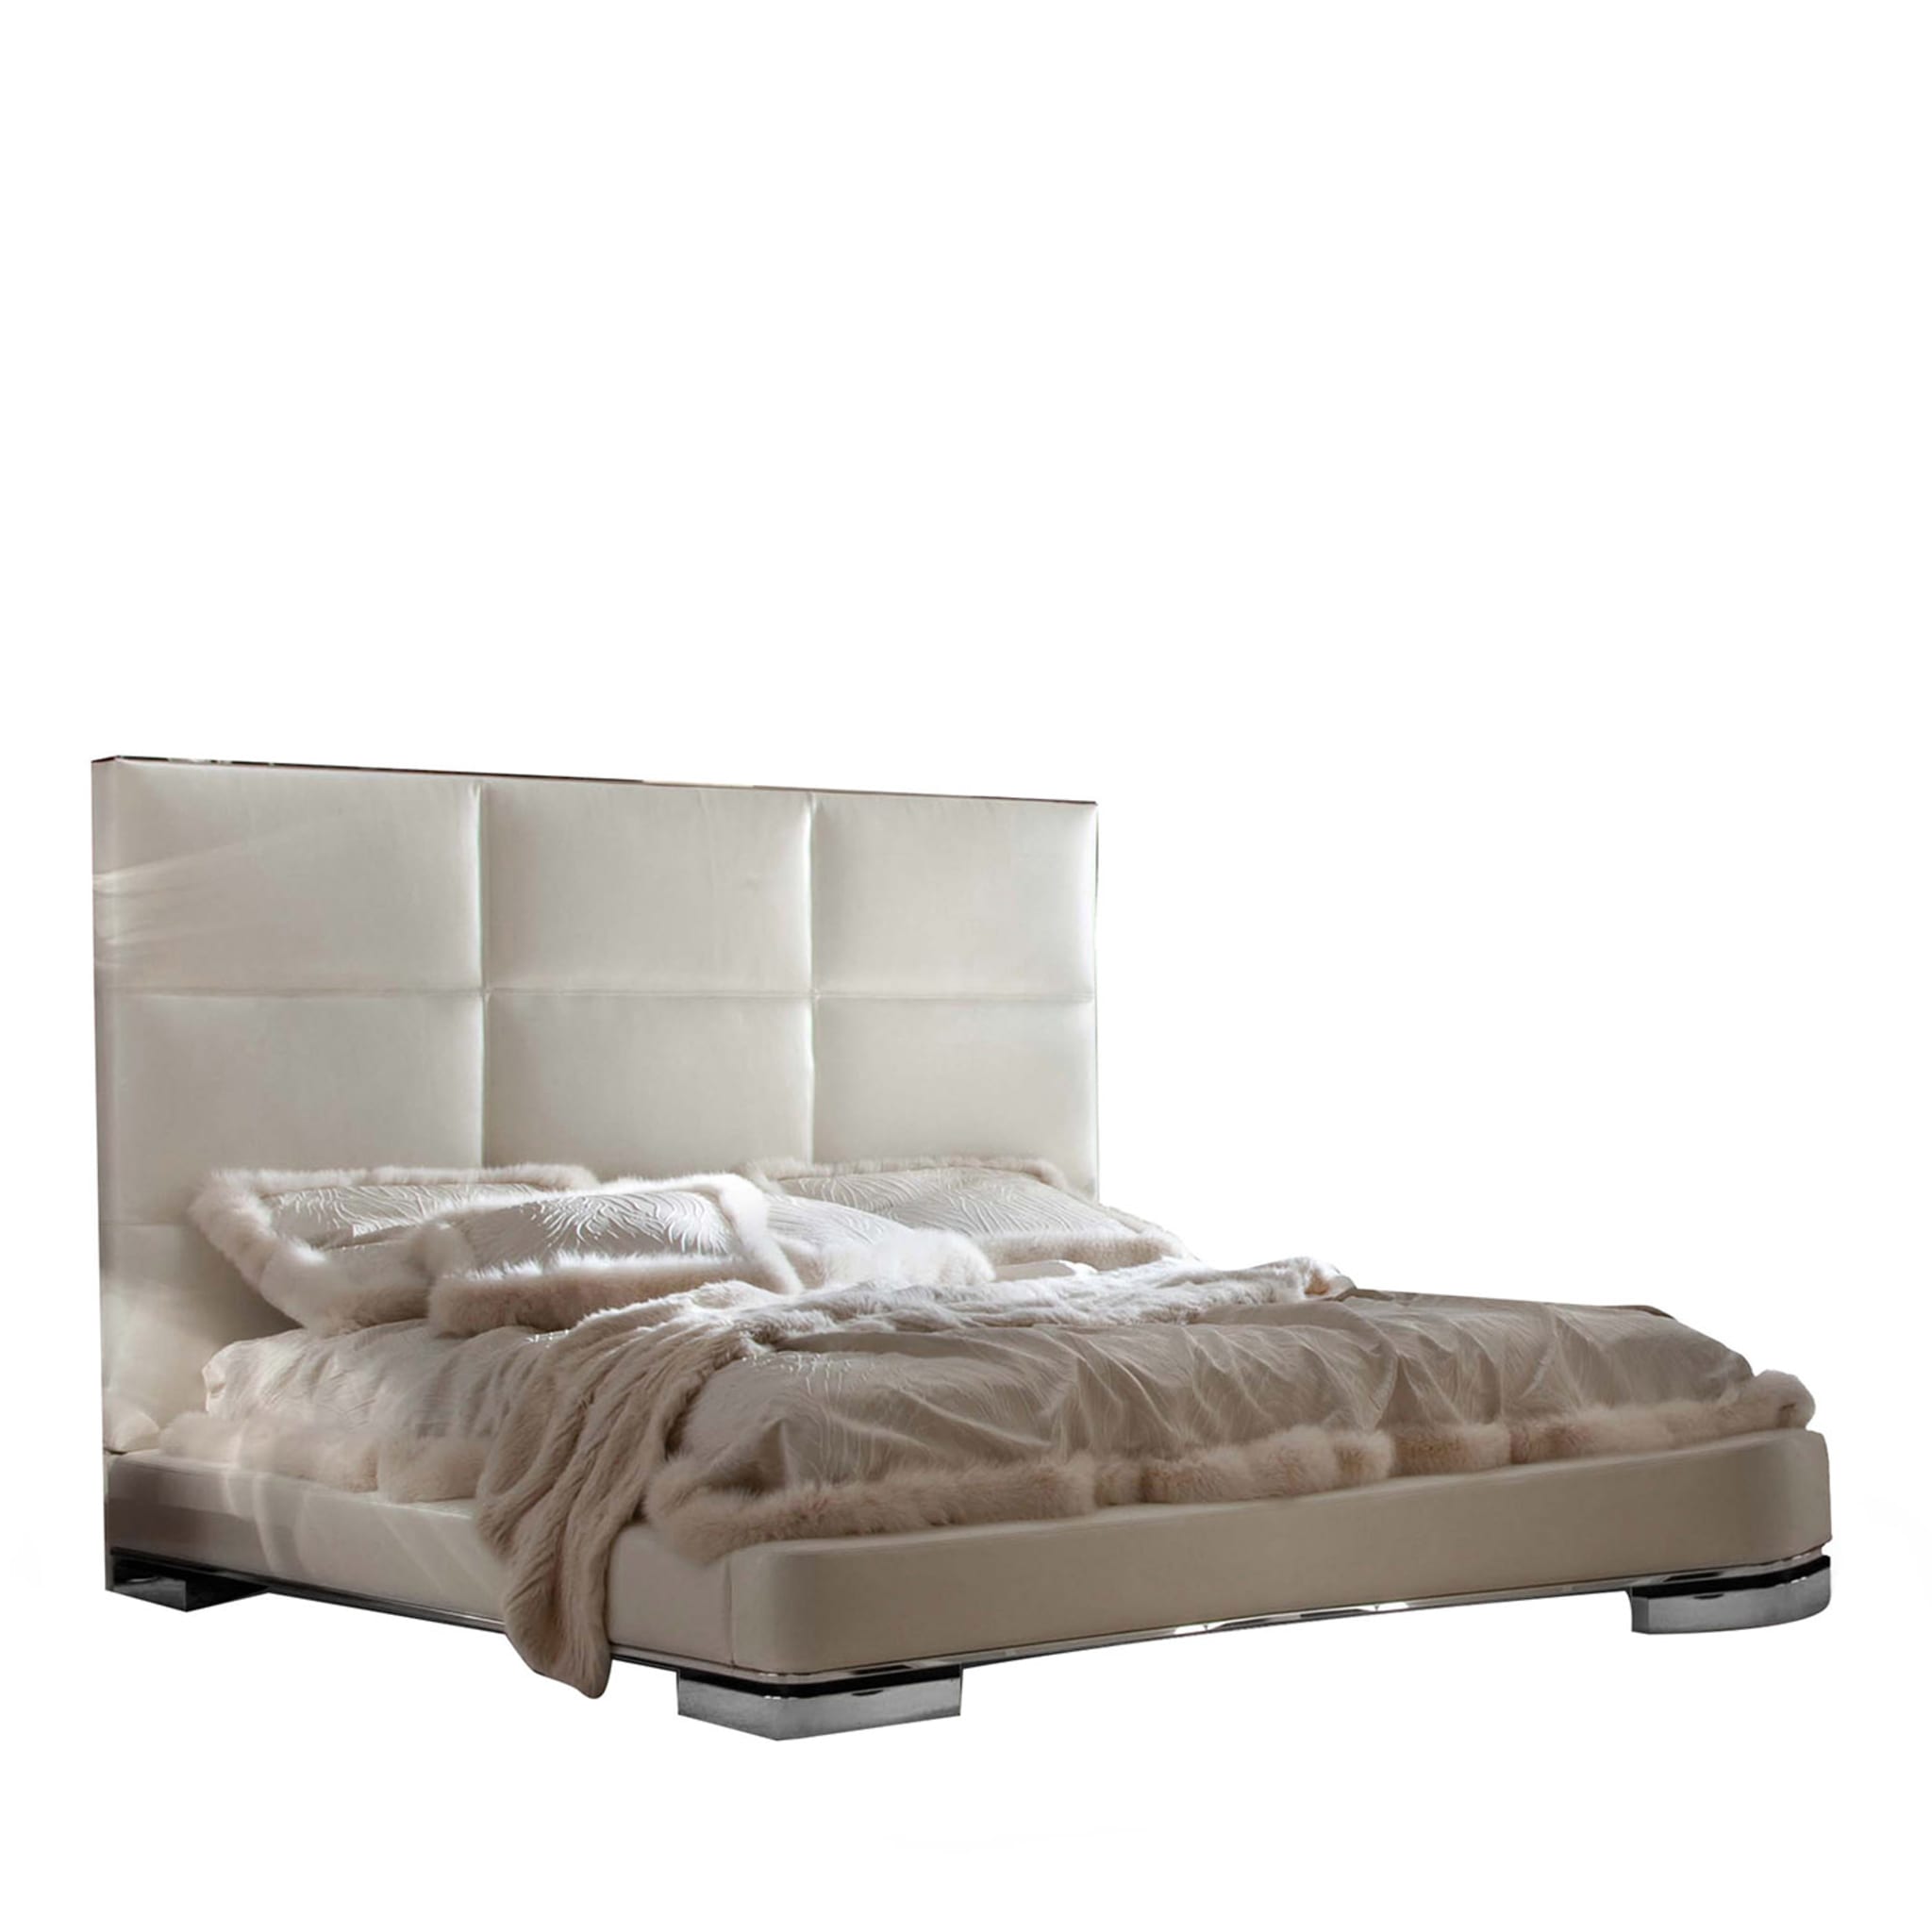 King Size Ivory Leather Bed - Main view